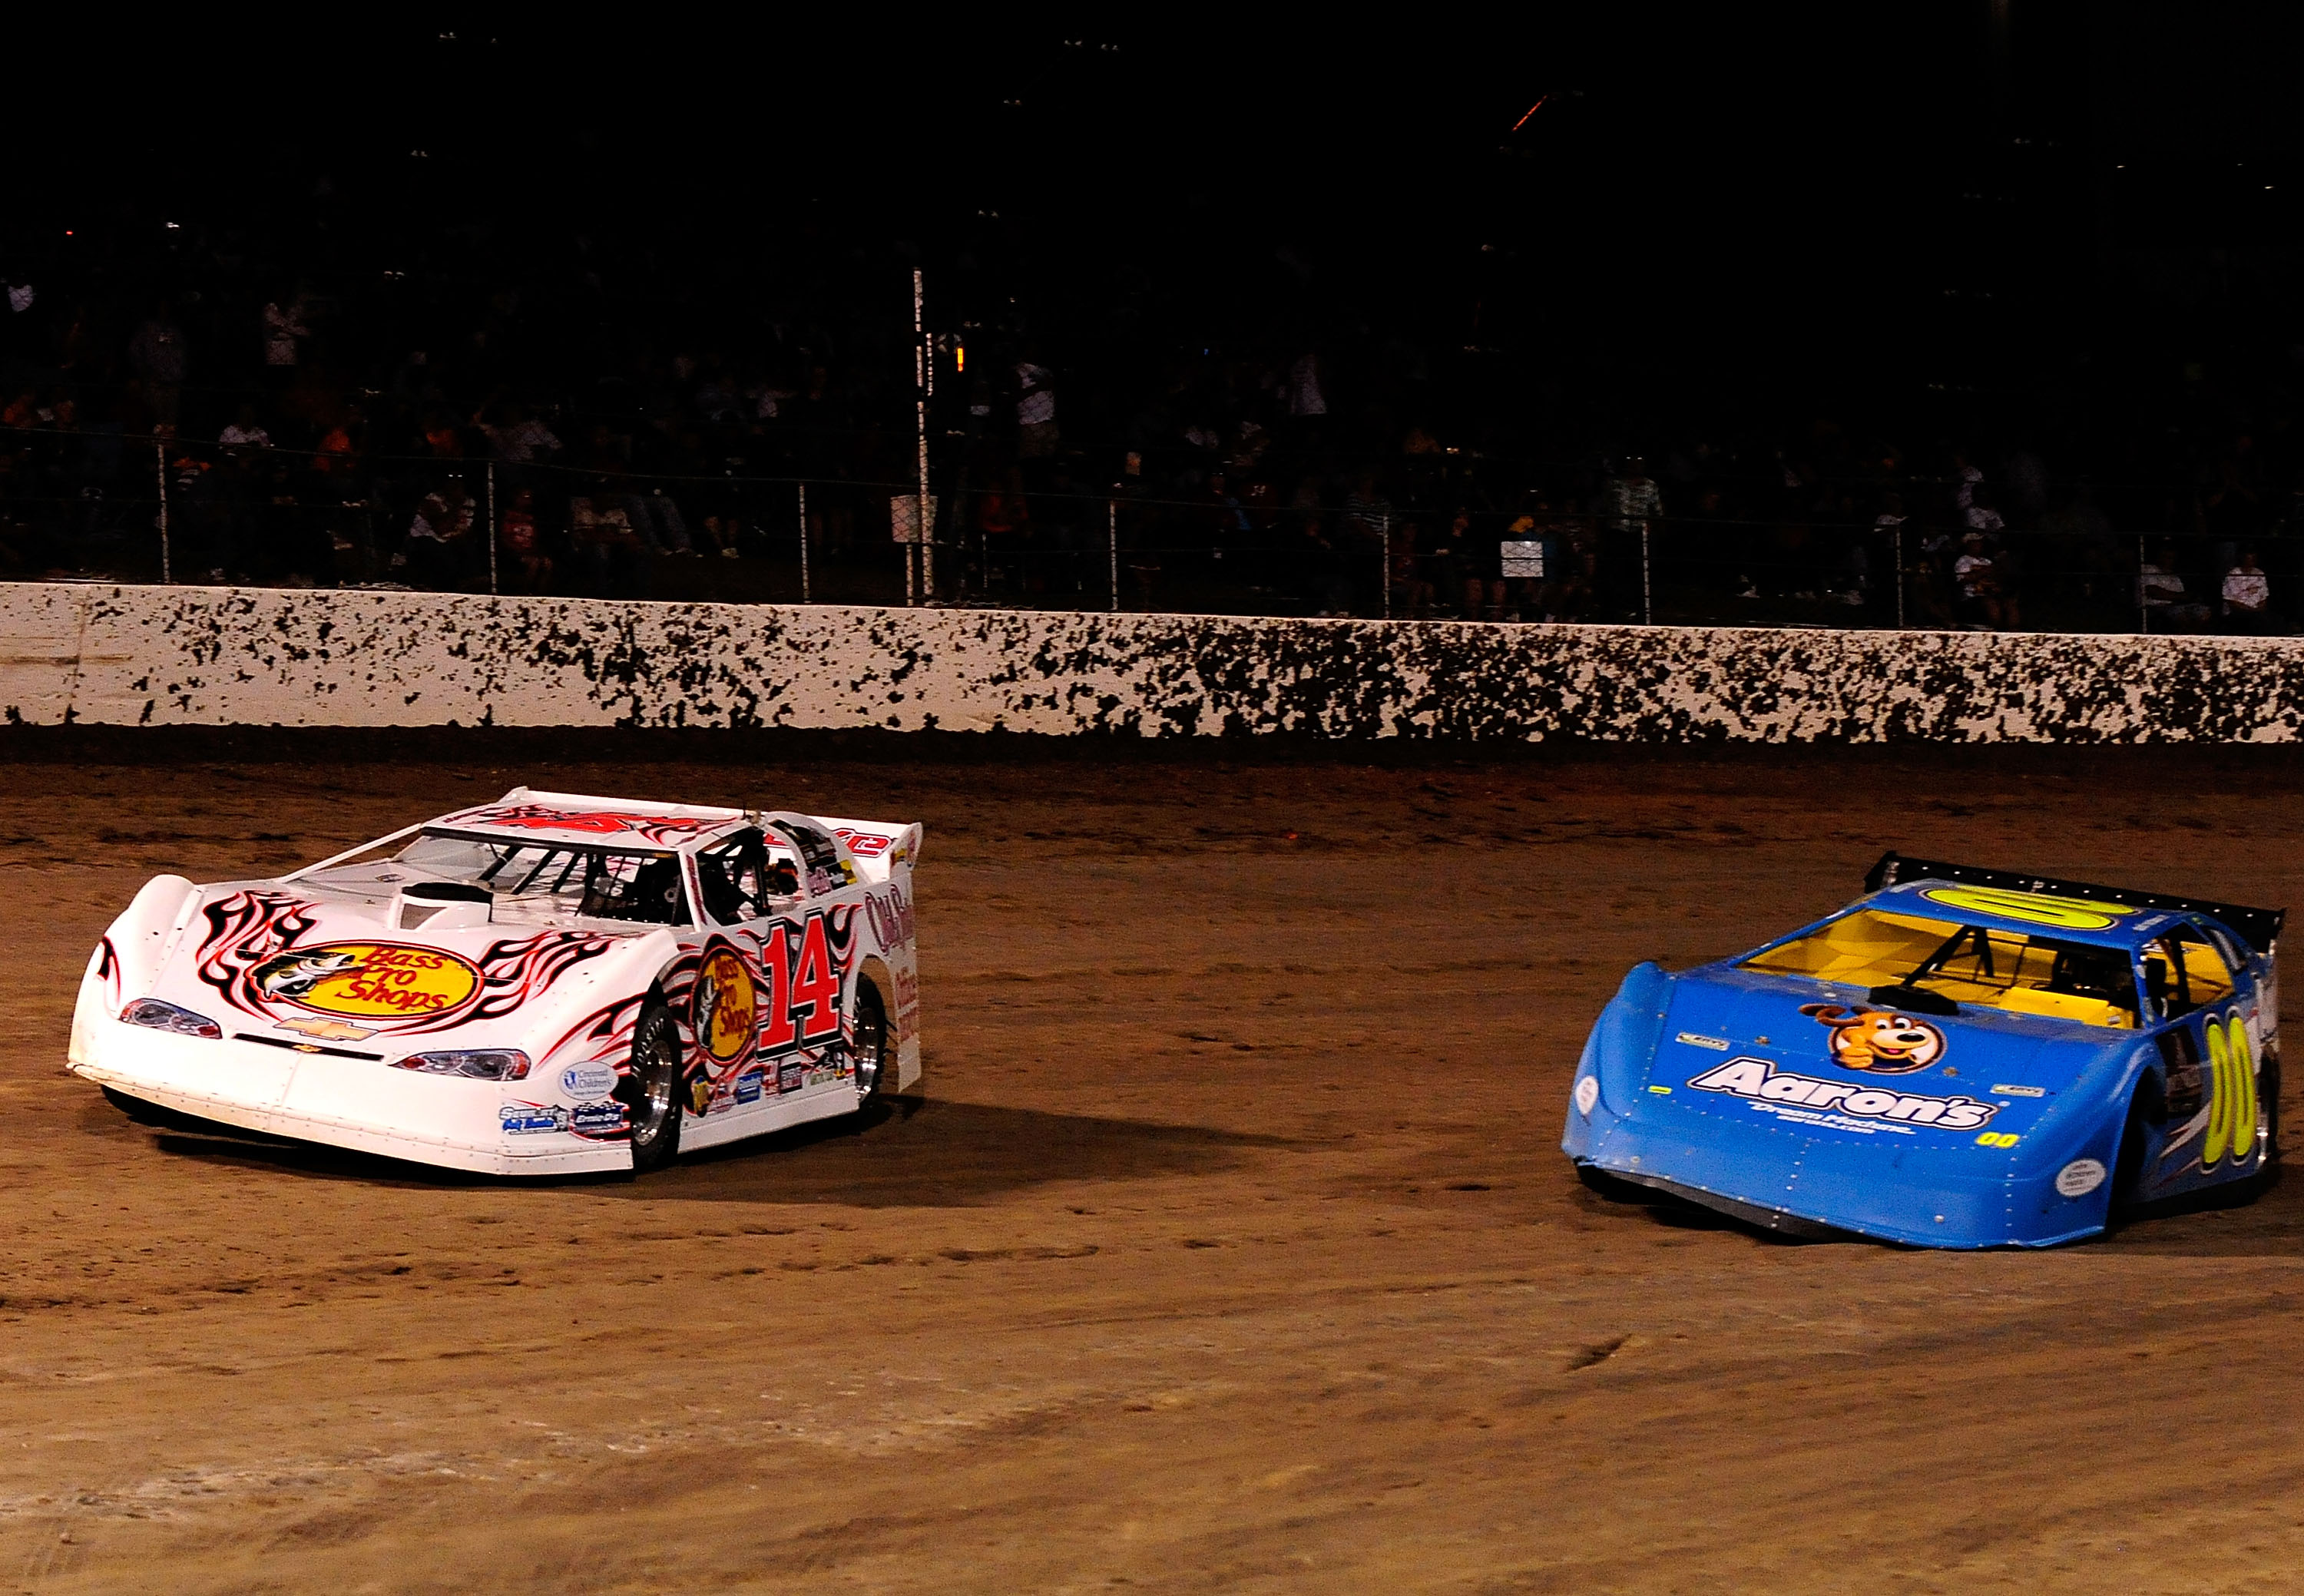 ROSSBURG, OH - JUNE 09: Tony Stewart, driver of the #14 Bass Pro Shops late model Chevrolet, passes David Reutimann, driver of the #00 Aaron's late model Toyota, after Reutimann lost a left front wheel during the Gillette Fusion ProGlide Prelude to the Dr